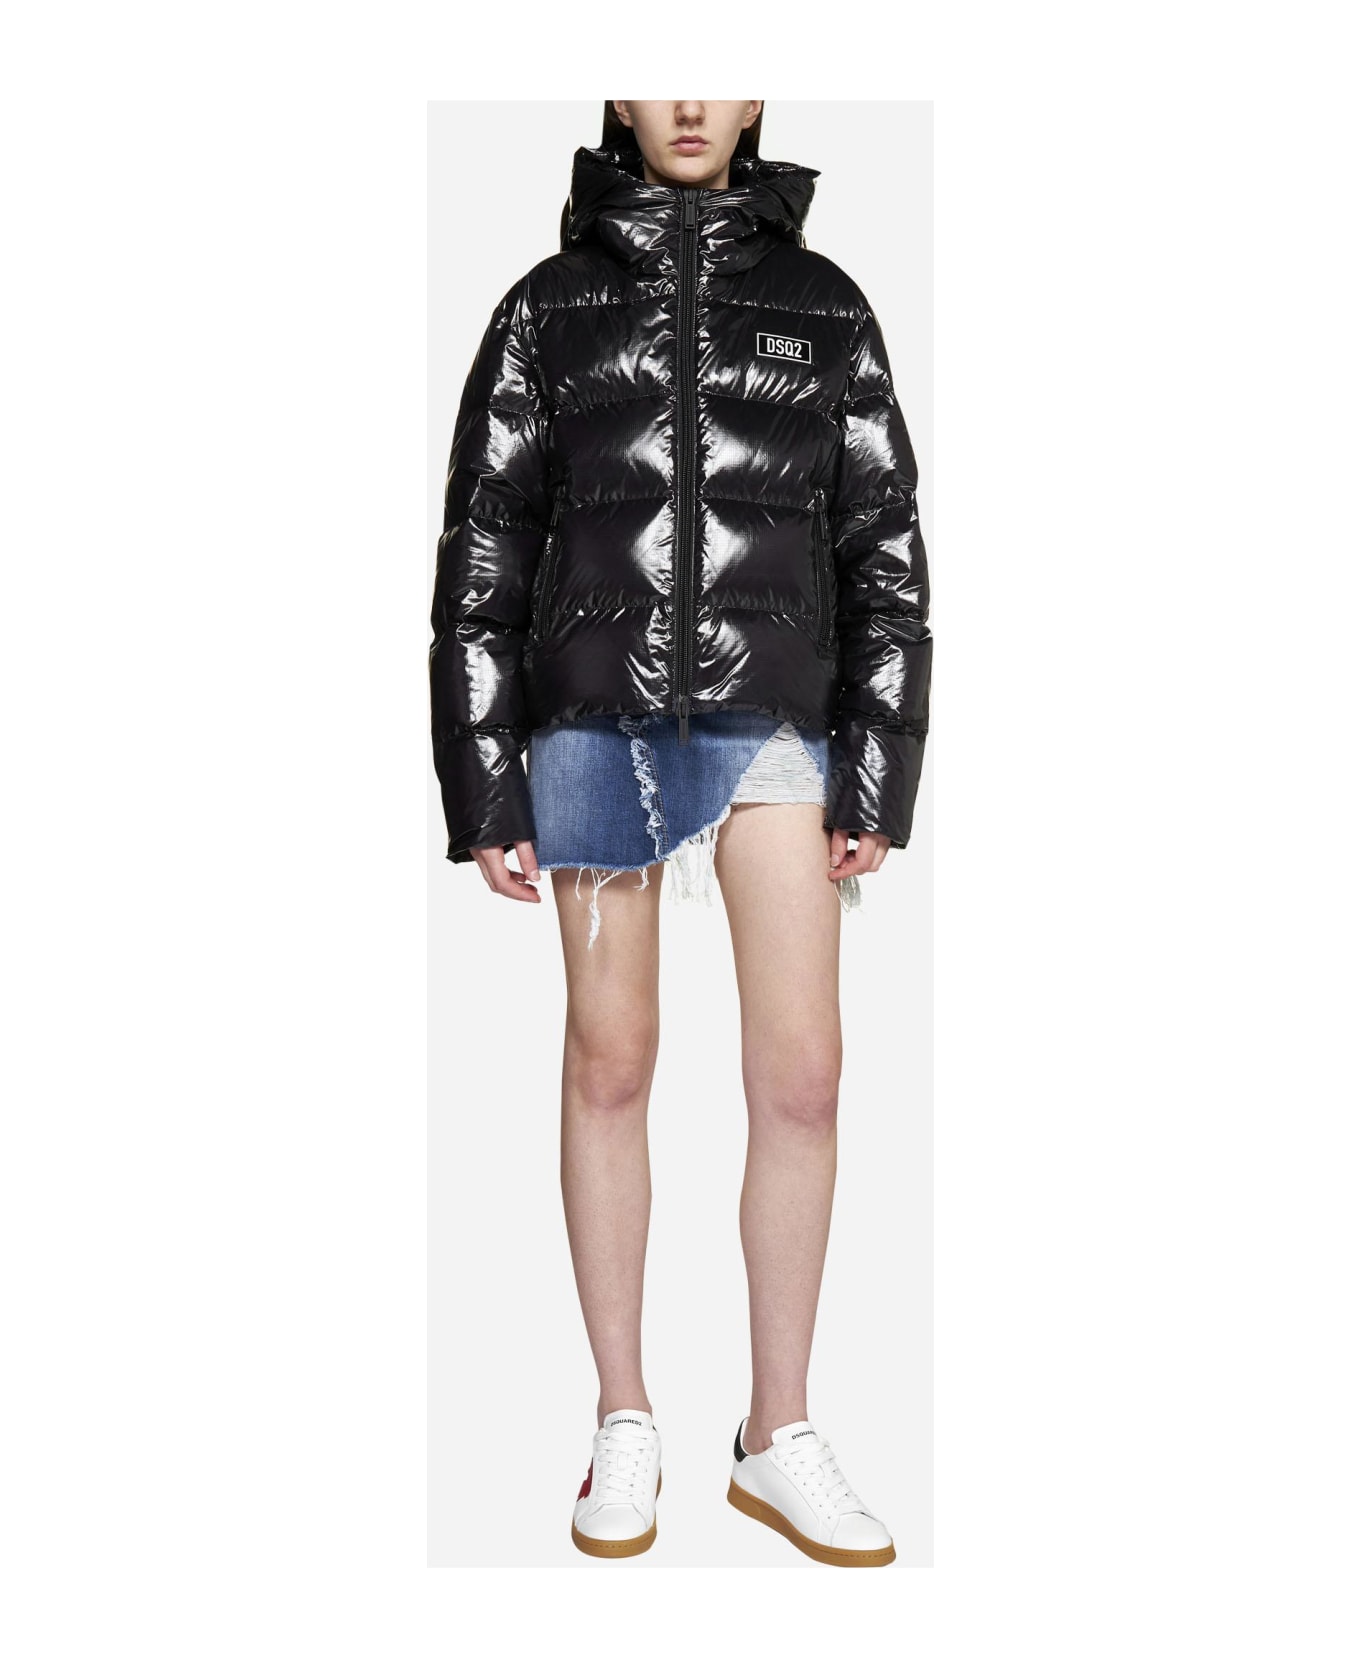 Dsquared2 Quilted Glossy Nylon Puffer Jacket - Black ダウンジャケット